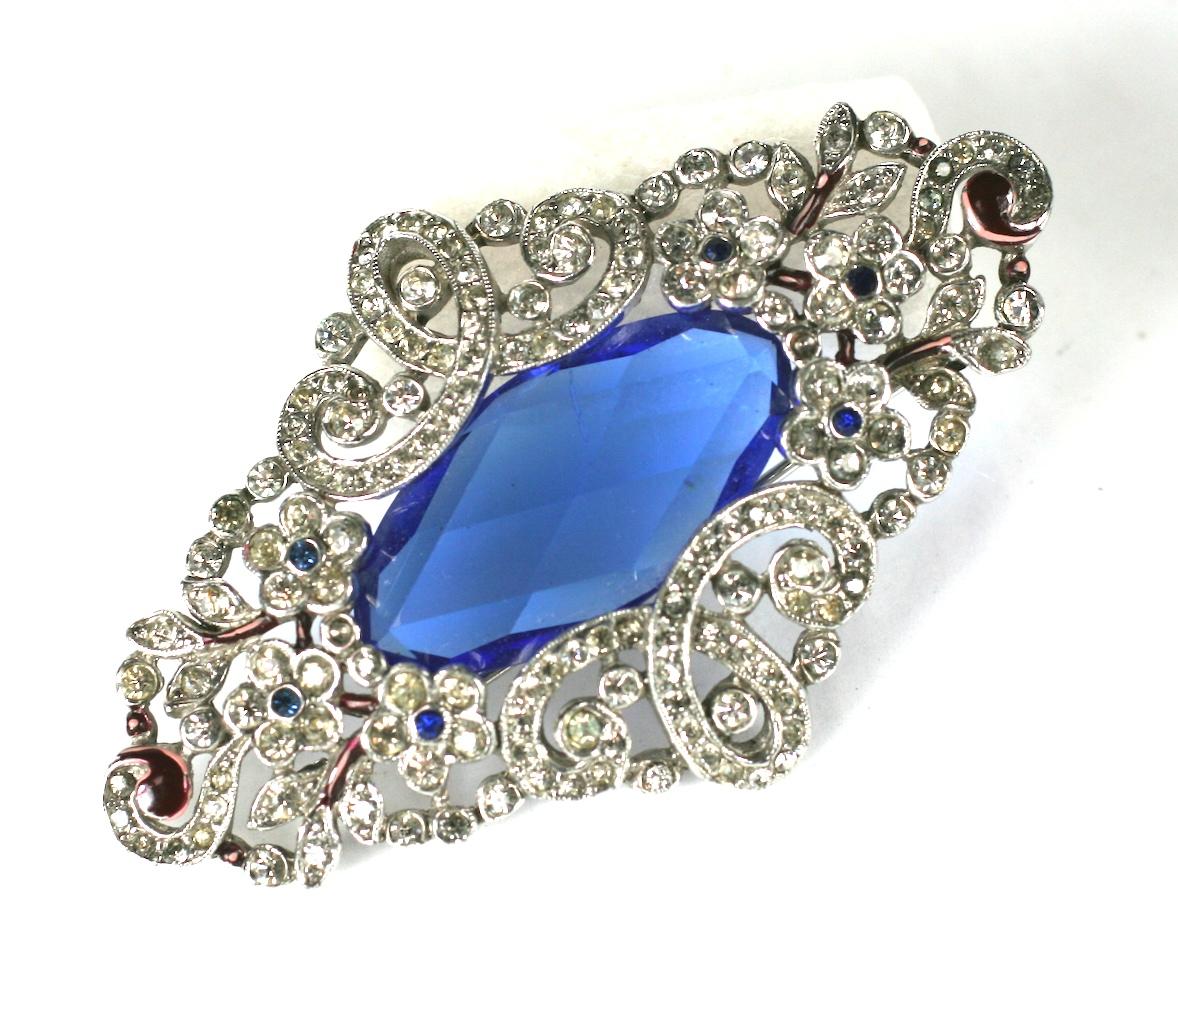 Trifari Alfred Phillipe Art Deco brooch with pave and enamel flowers and garlands surrounding a back set faceted blue stone. 
1930's USA.  2.75